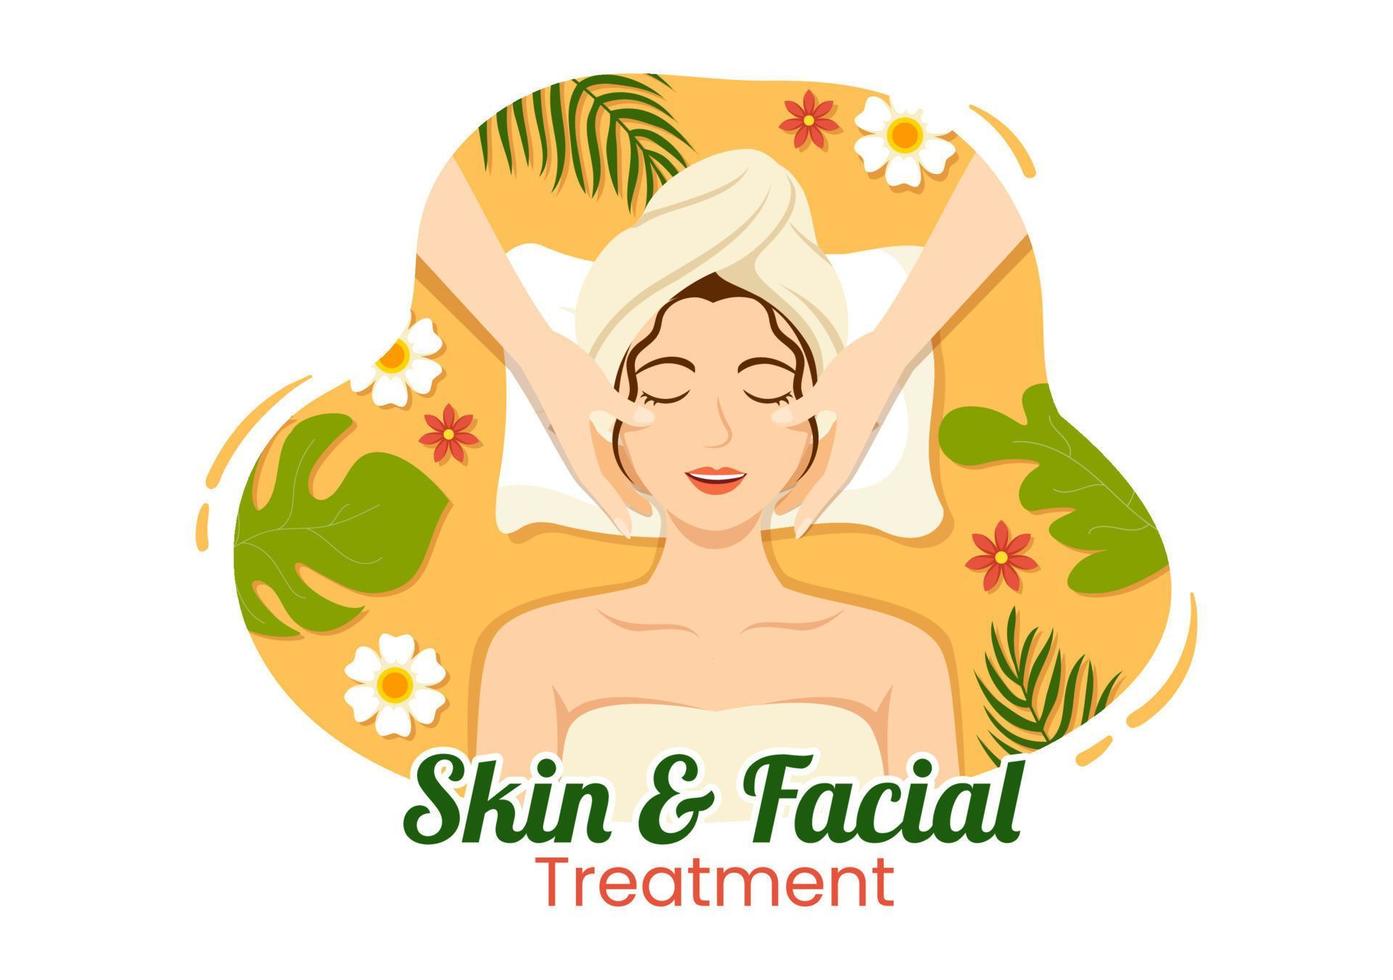 Facial and Skin Treatment Illustration with Women Skin Care, Anti Age Procedure, Massage or SPA Wellness in Flat Cartoon Hand Drawn Templates vector